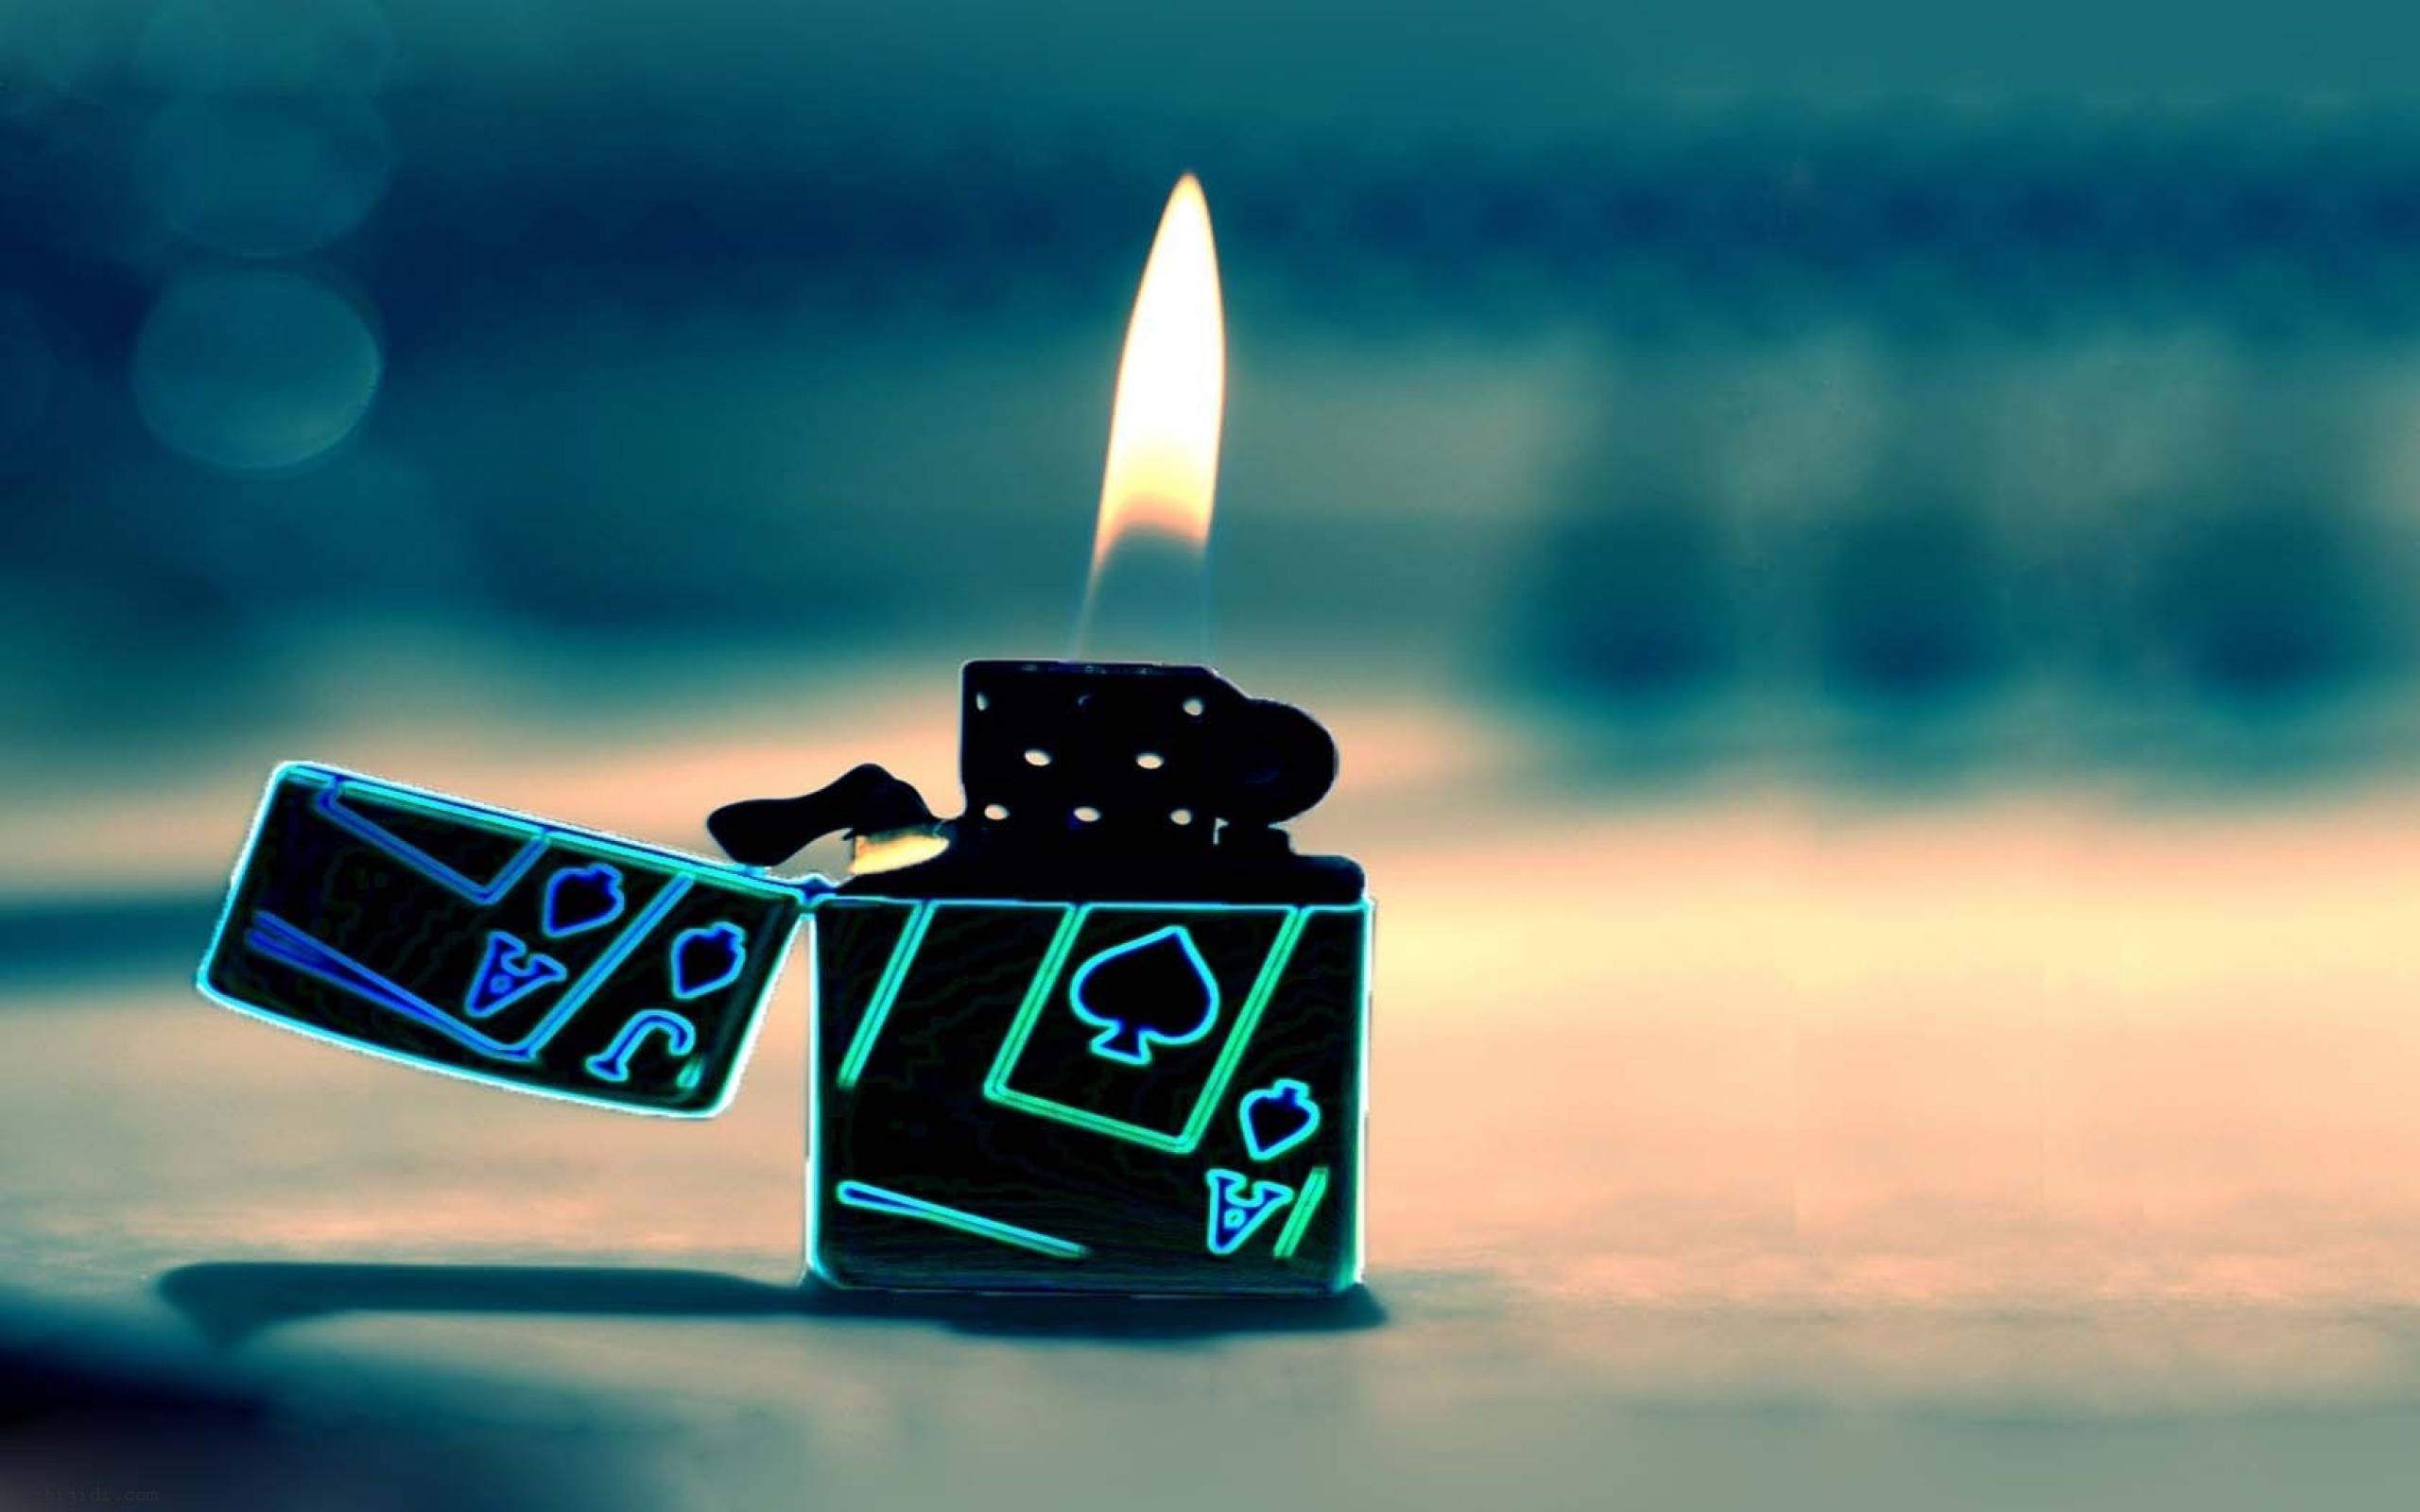 2560x1600 ... Awesome Zippo Lighters Awesome Free Full Hd Wallpapers Of 2015 Zippo  Lighters Wallpaper Cave